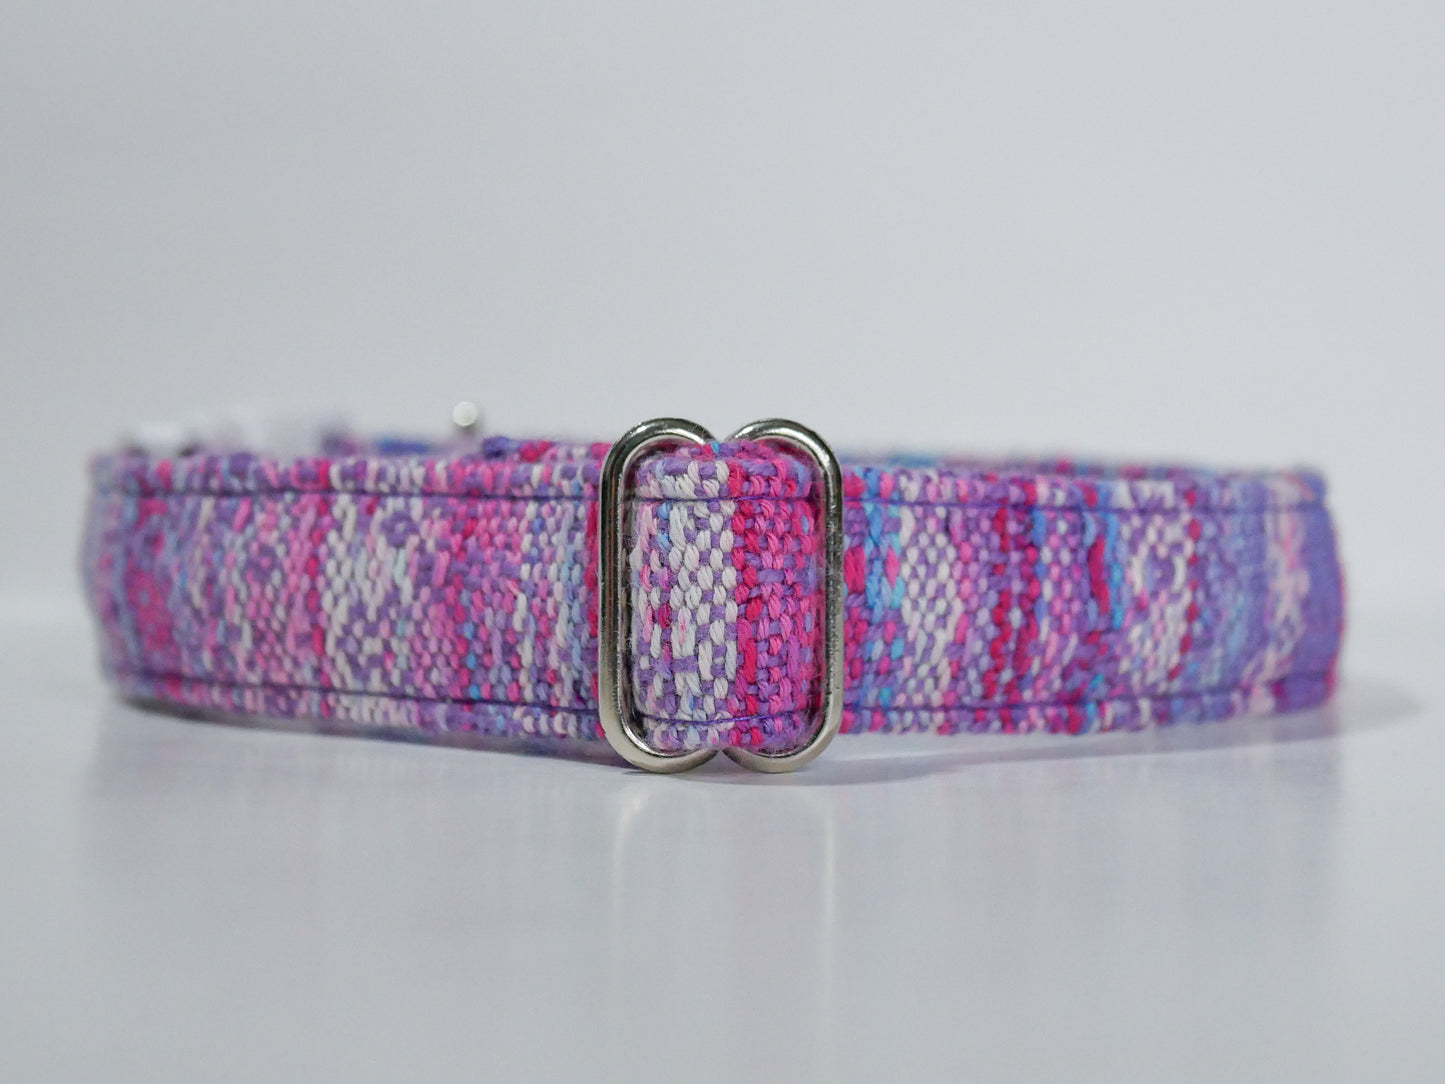 Handwoven Dog Collar - Large - Cotton Candy